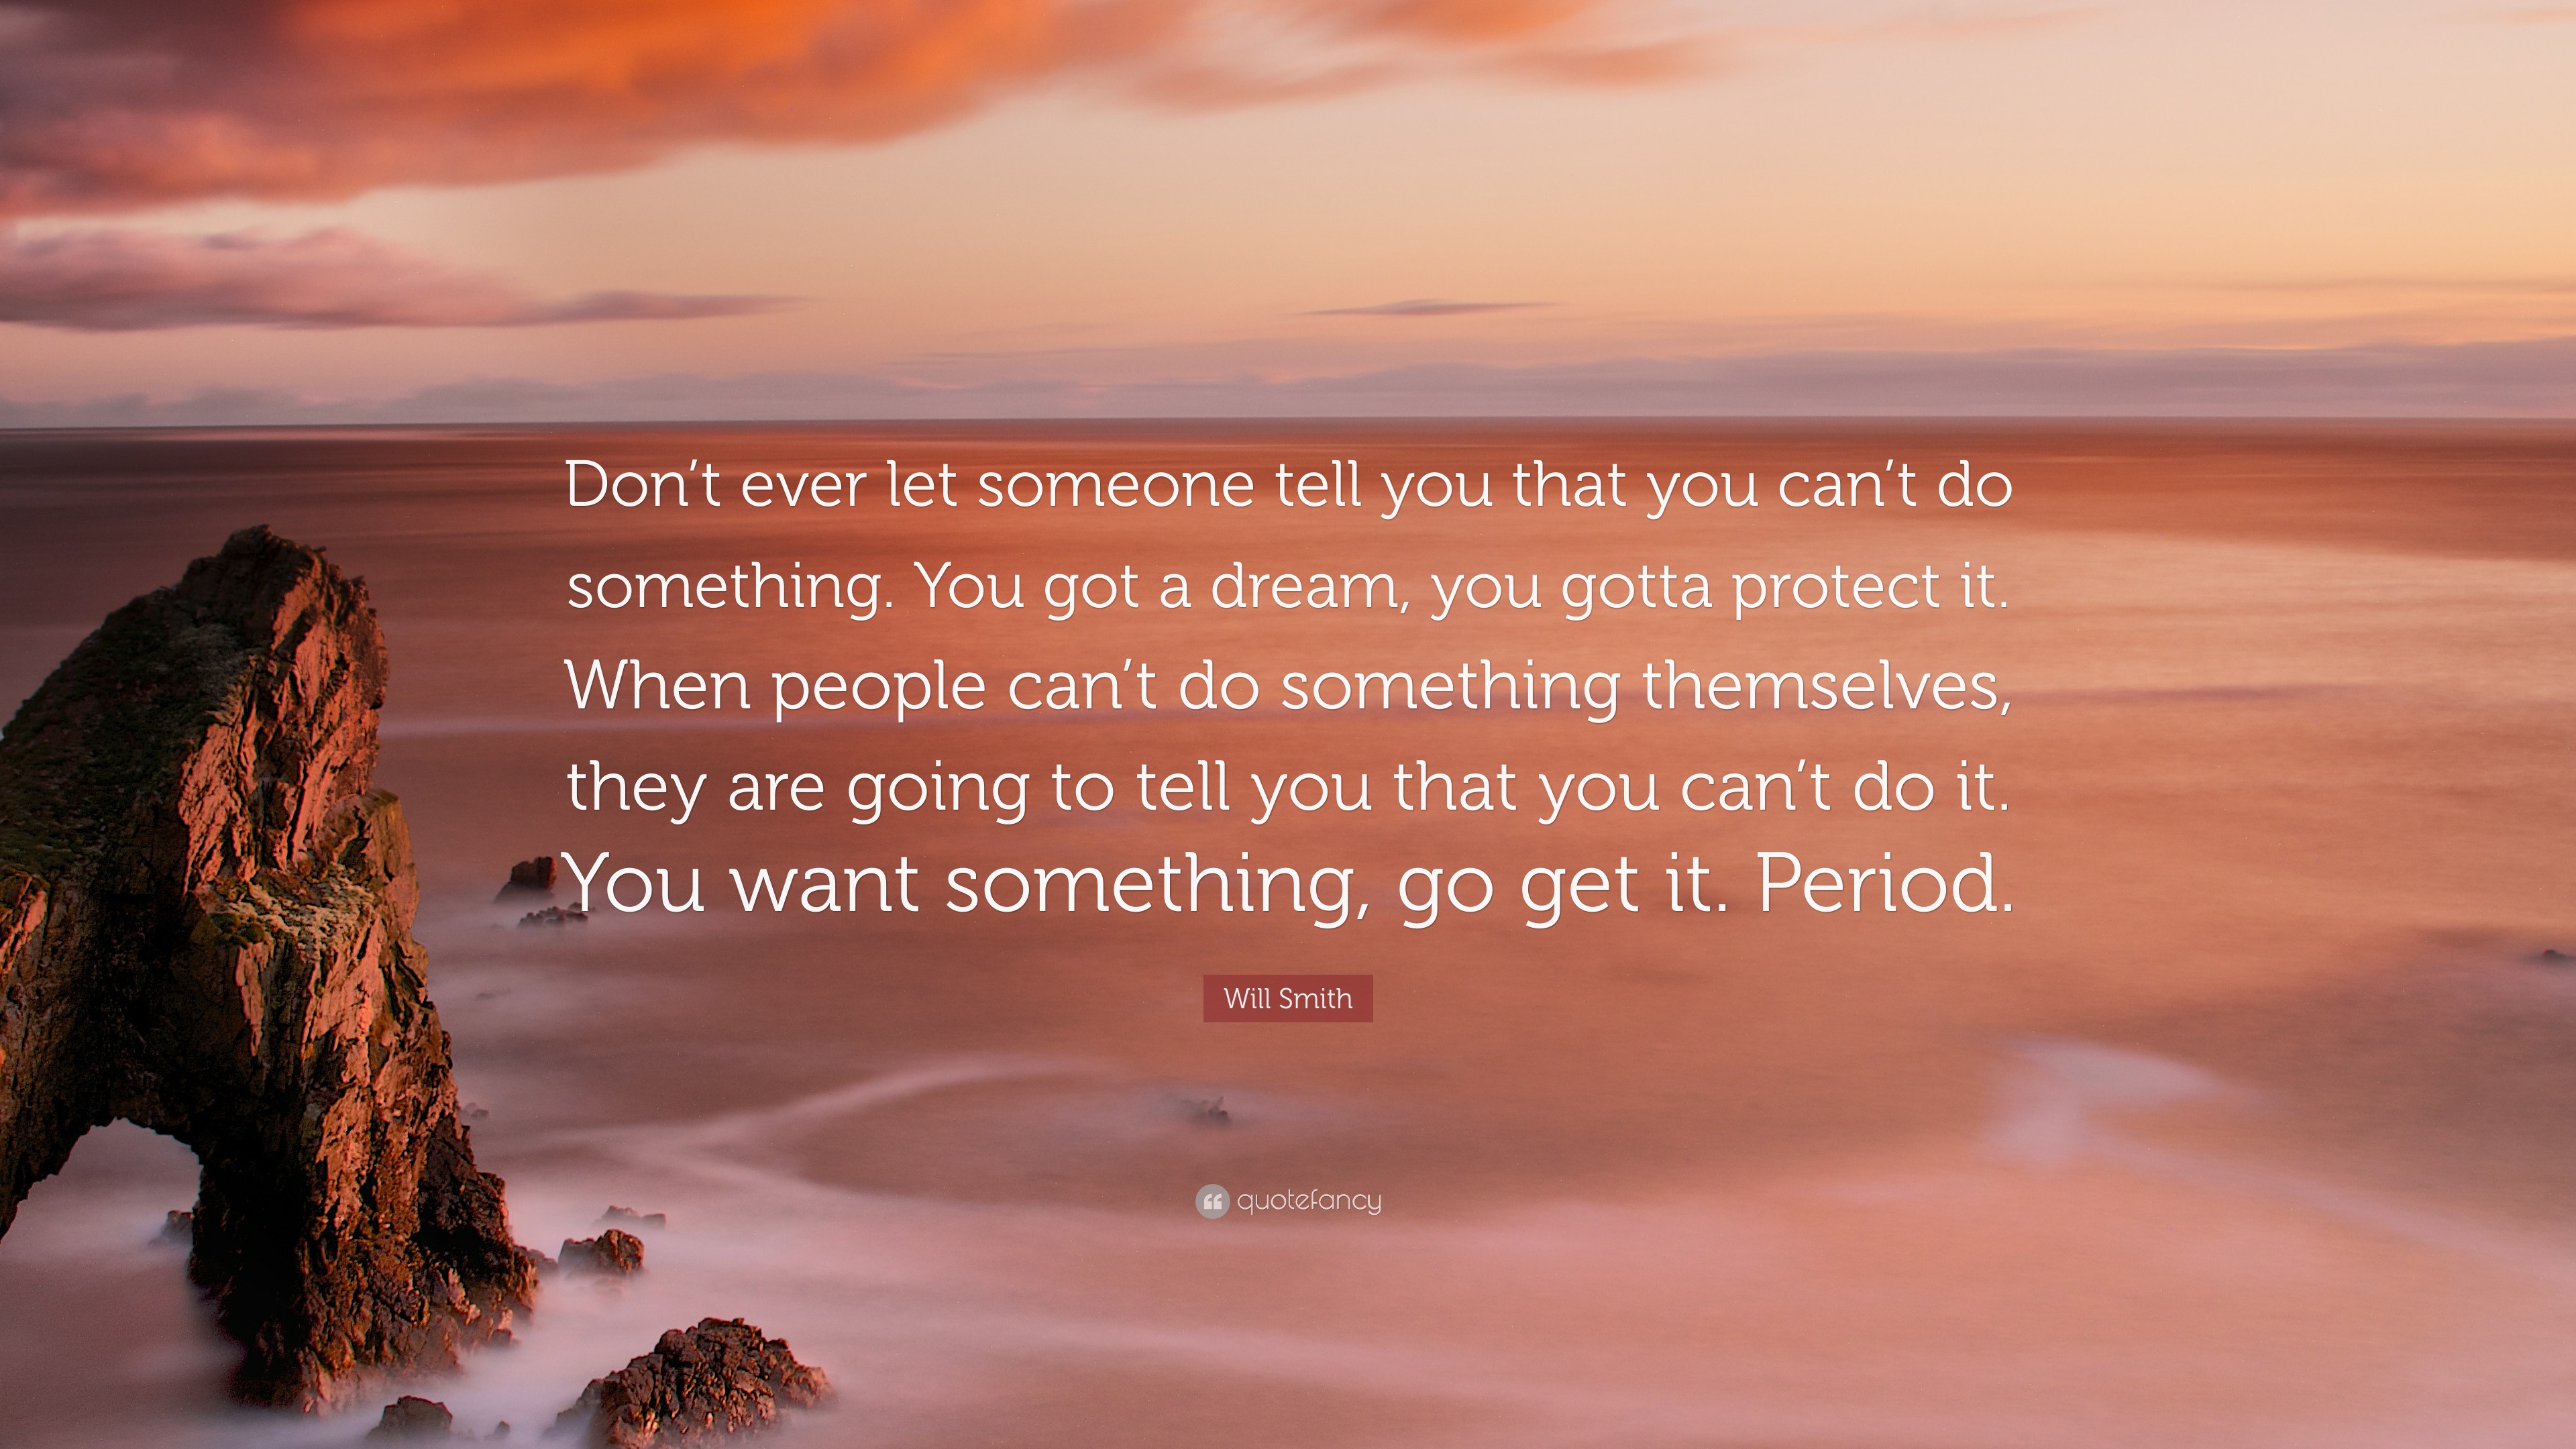 Will Smith Quote: “Don’t ever let someone tell you that you can’t do